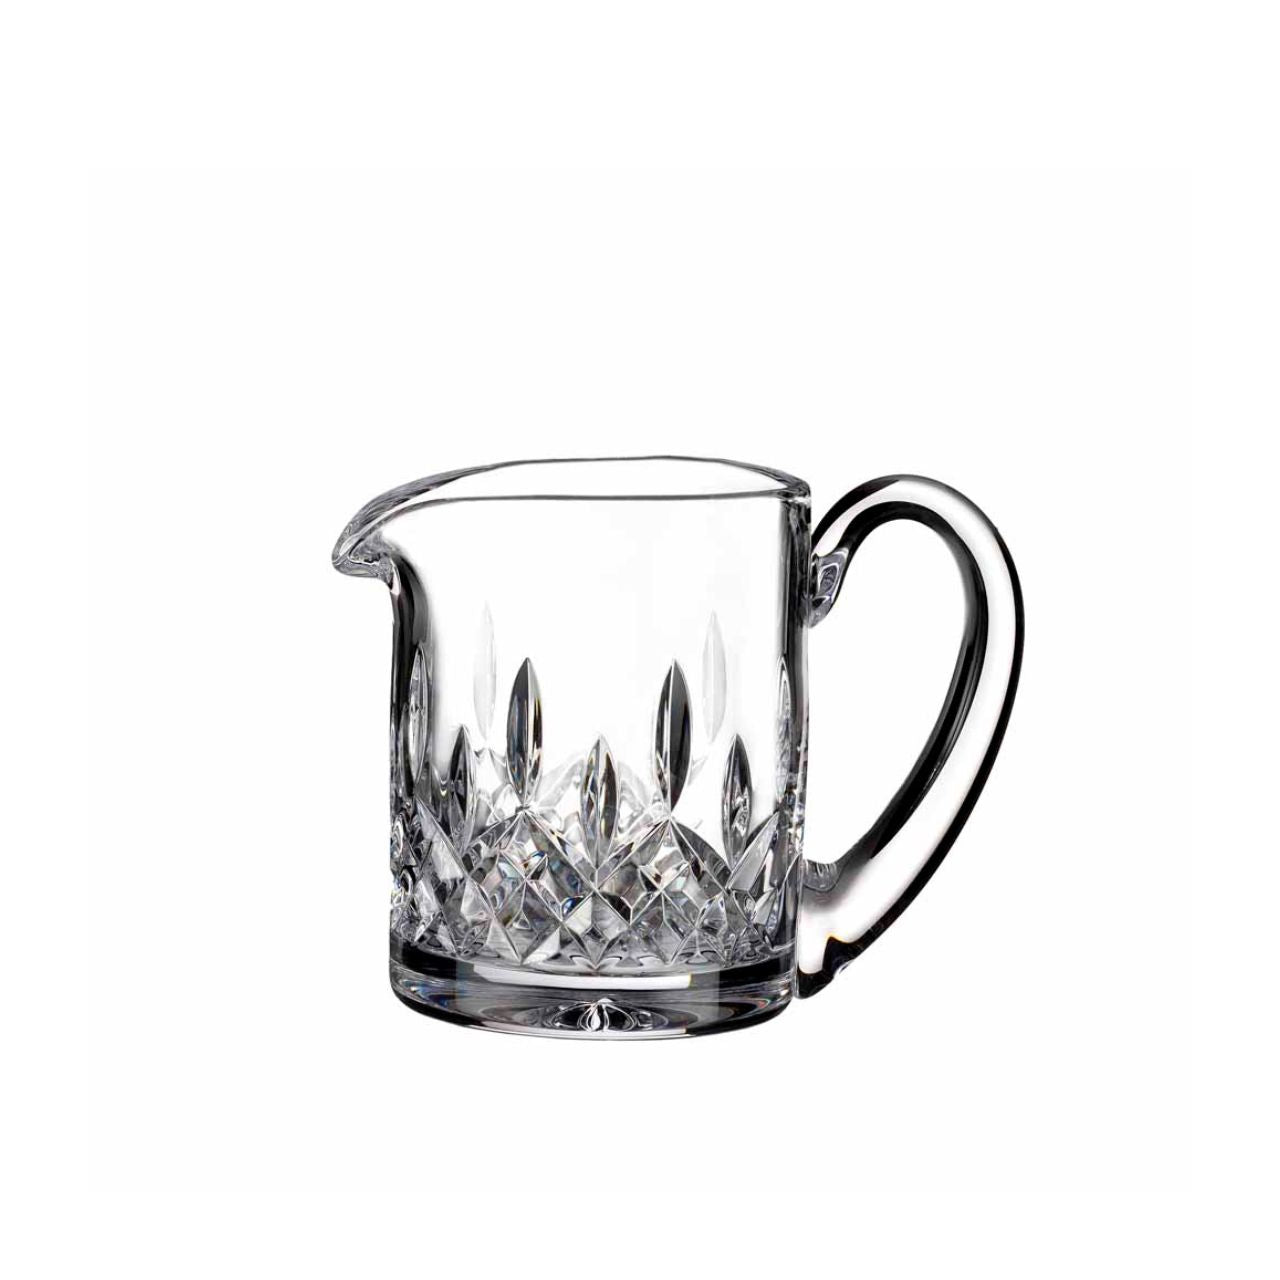 Waterford Crystal Lismore Connoisseur Whiskey Jug  This elegant Lismore small jug brings luxury style to entertaining at home. Crafted from the finest crystal, this Connoisseur Whiskey jug pitcher has a reassuring weight and sturdy handle that makes pouring the perfect serving simply effortless.